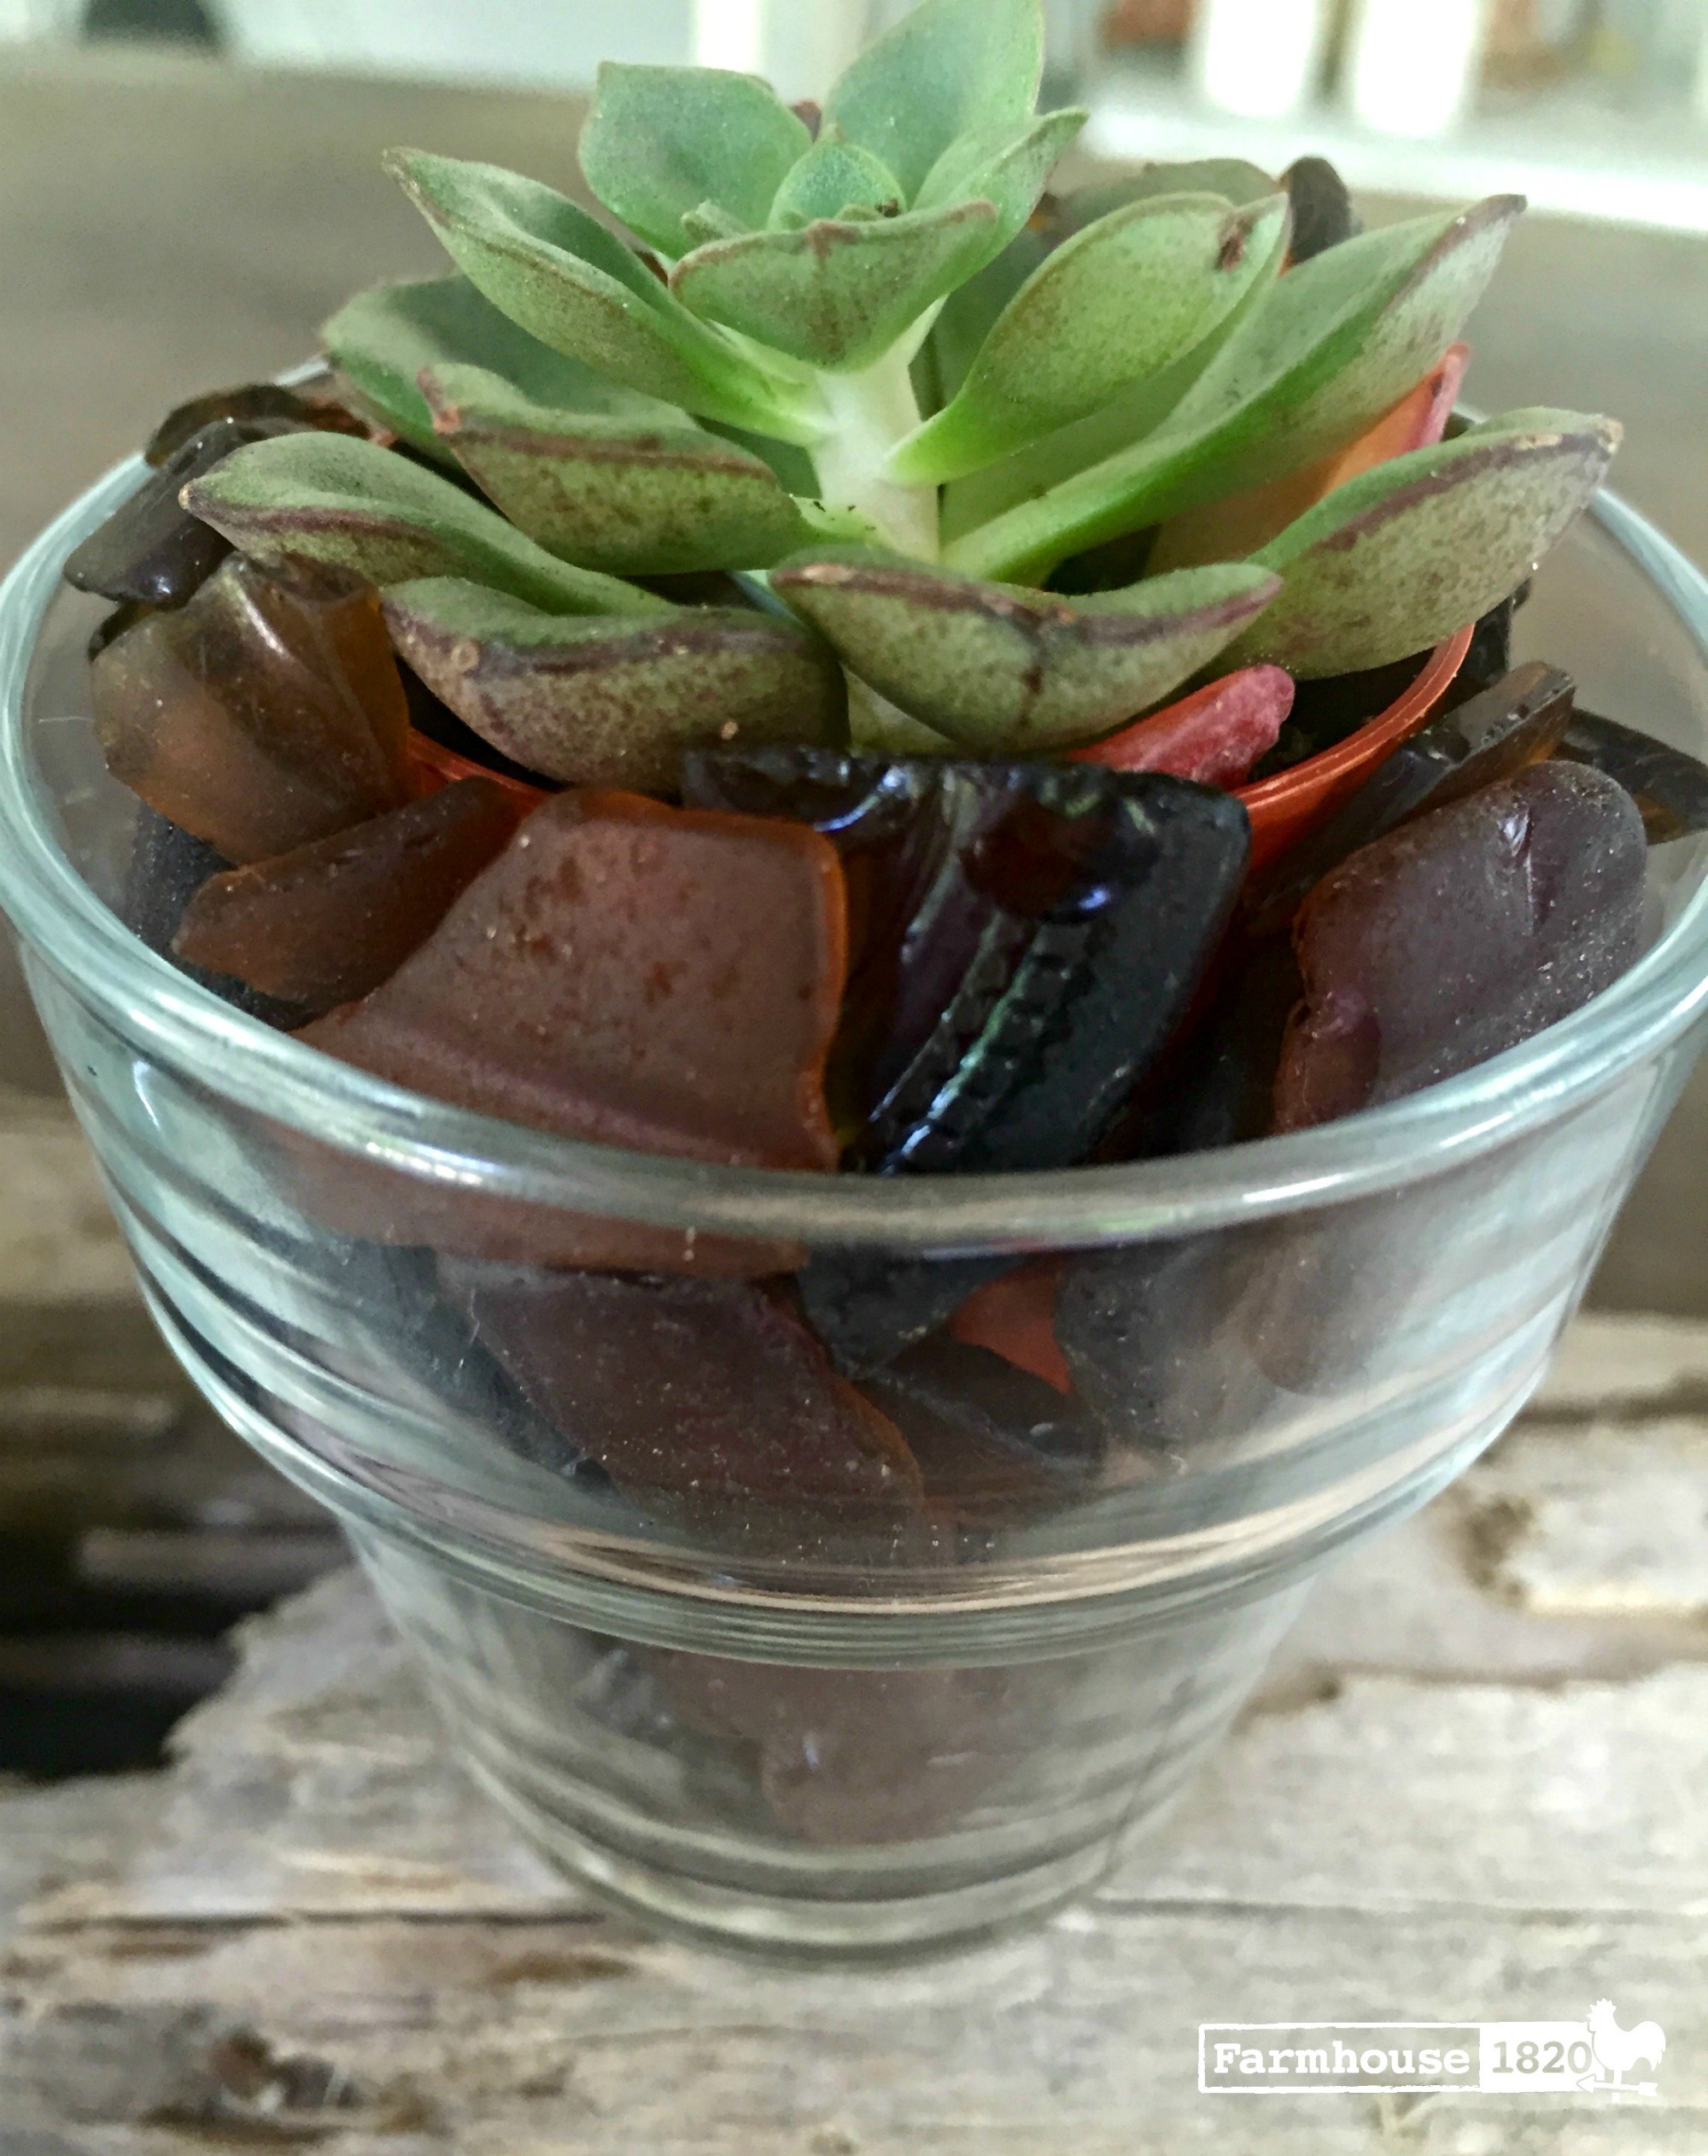 succulent - planted with brown sea glass